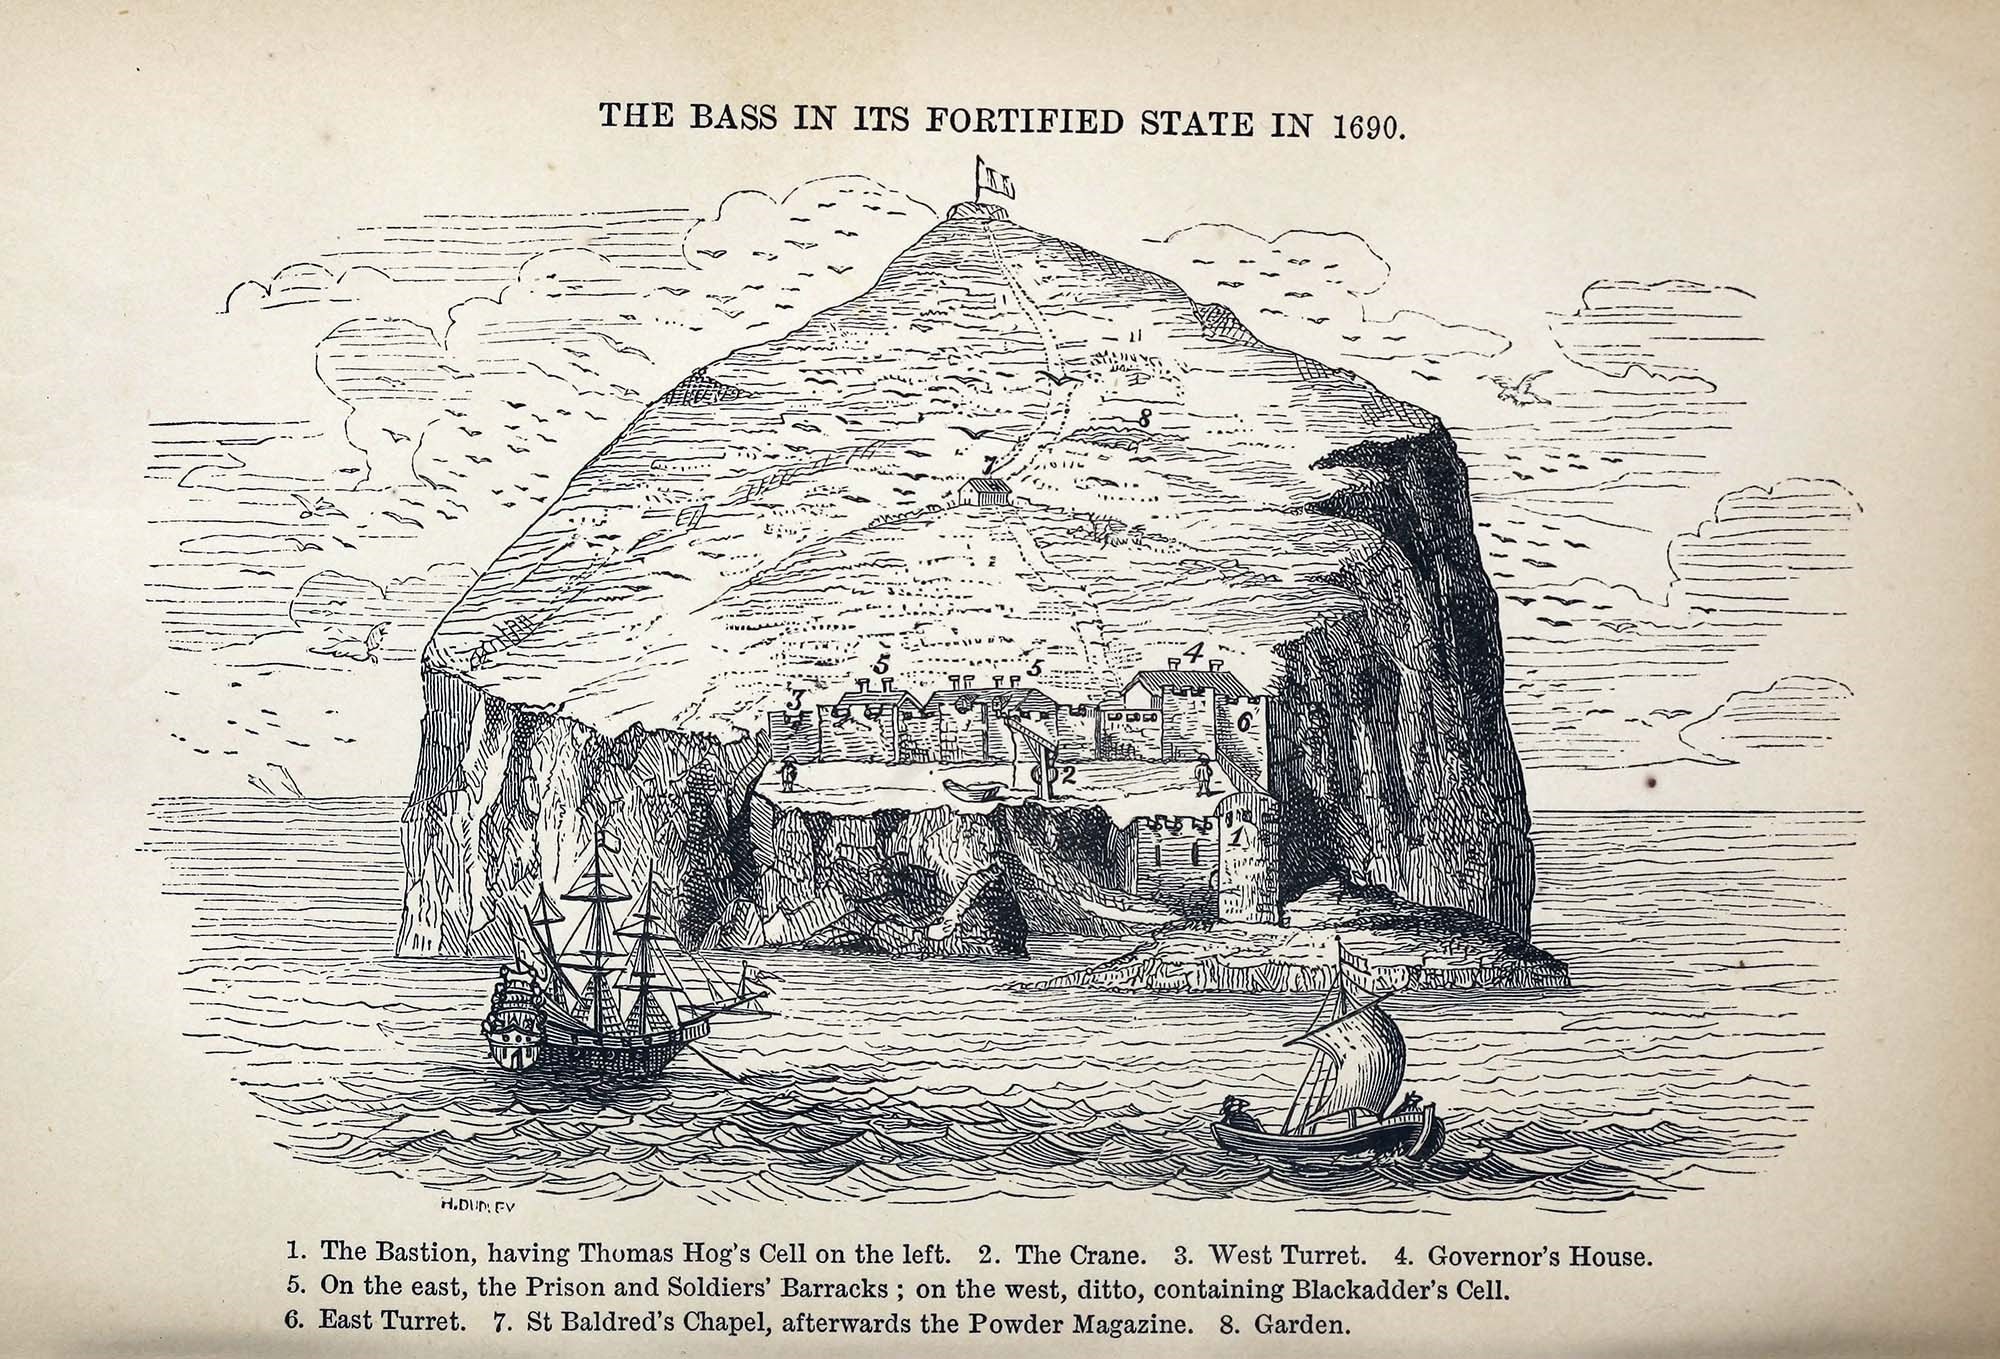 Illustration showing a massive rock sticking out of a sea. A castle and prison is on the rock, and two ships sail in front of it.